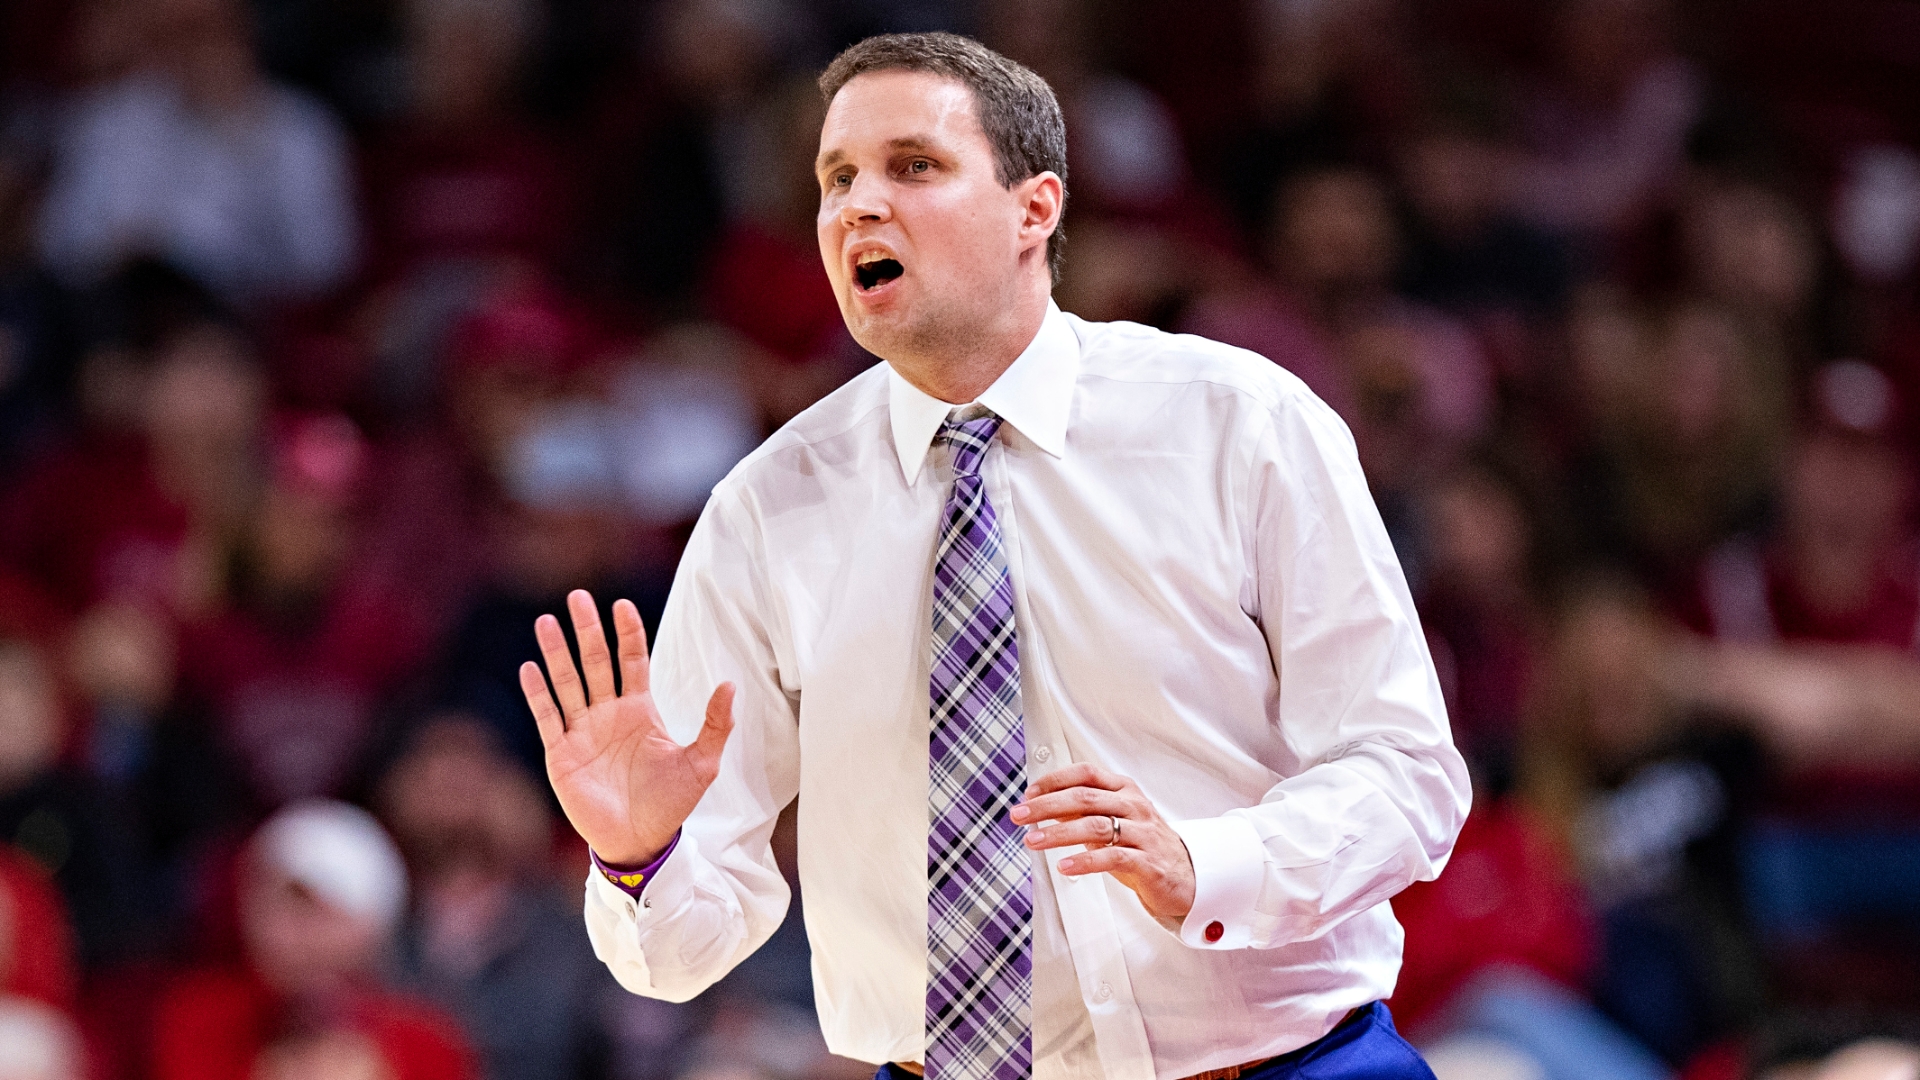 The case against Will Wade will take a long time to solve